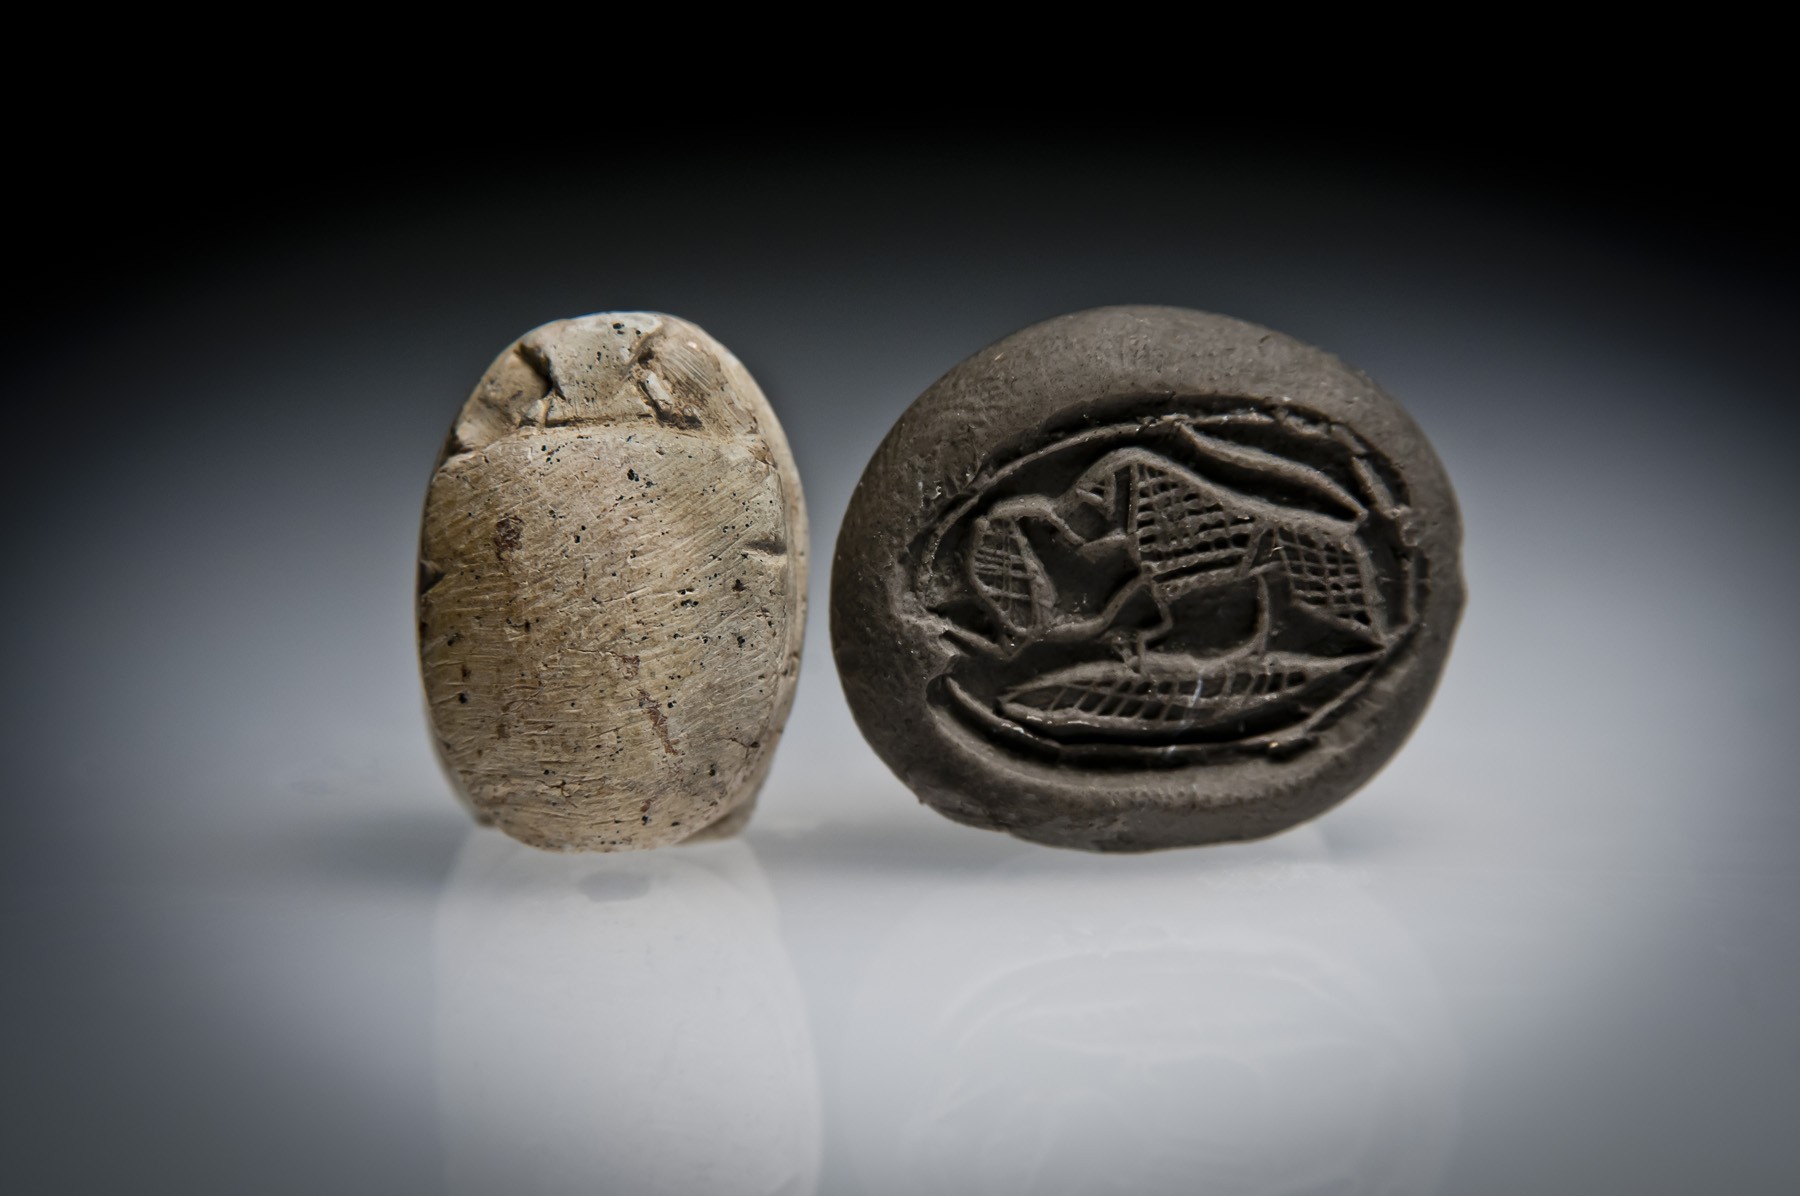 A Hyksos Steatite Scarab Engraved with a Lion Confronting a Cobra